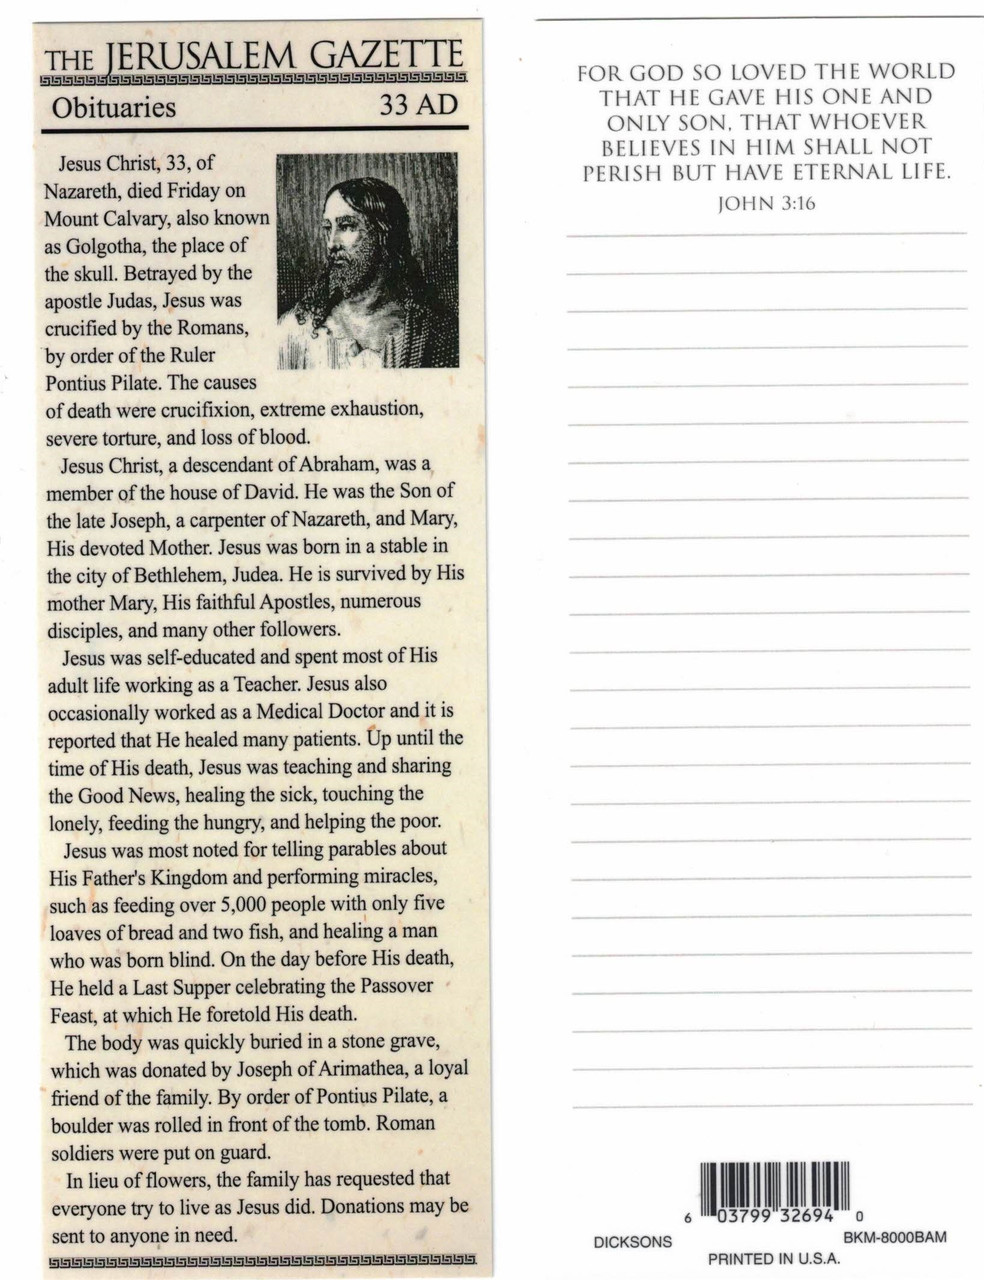 Obituary of Jesus Bookmark with Room to Record Prayer Requests on back